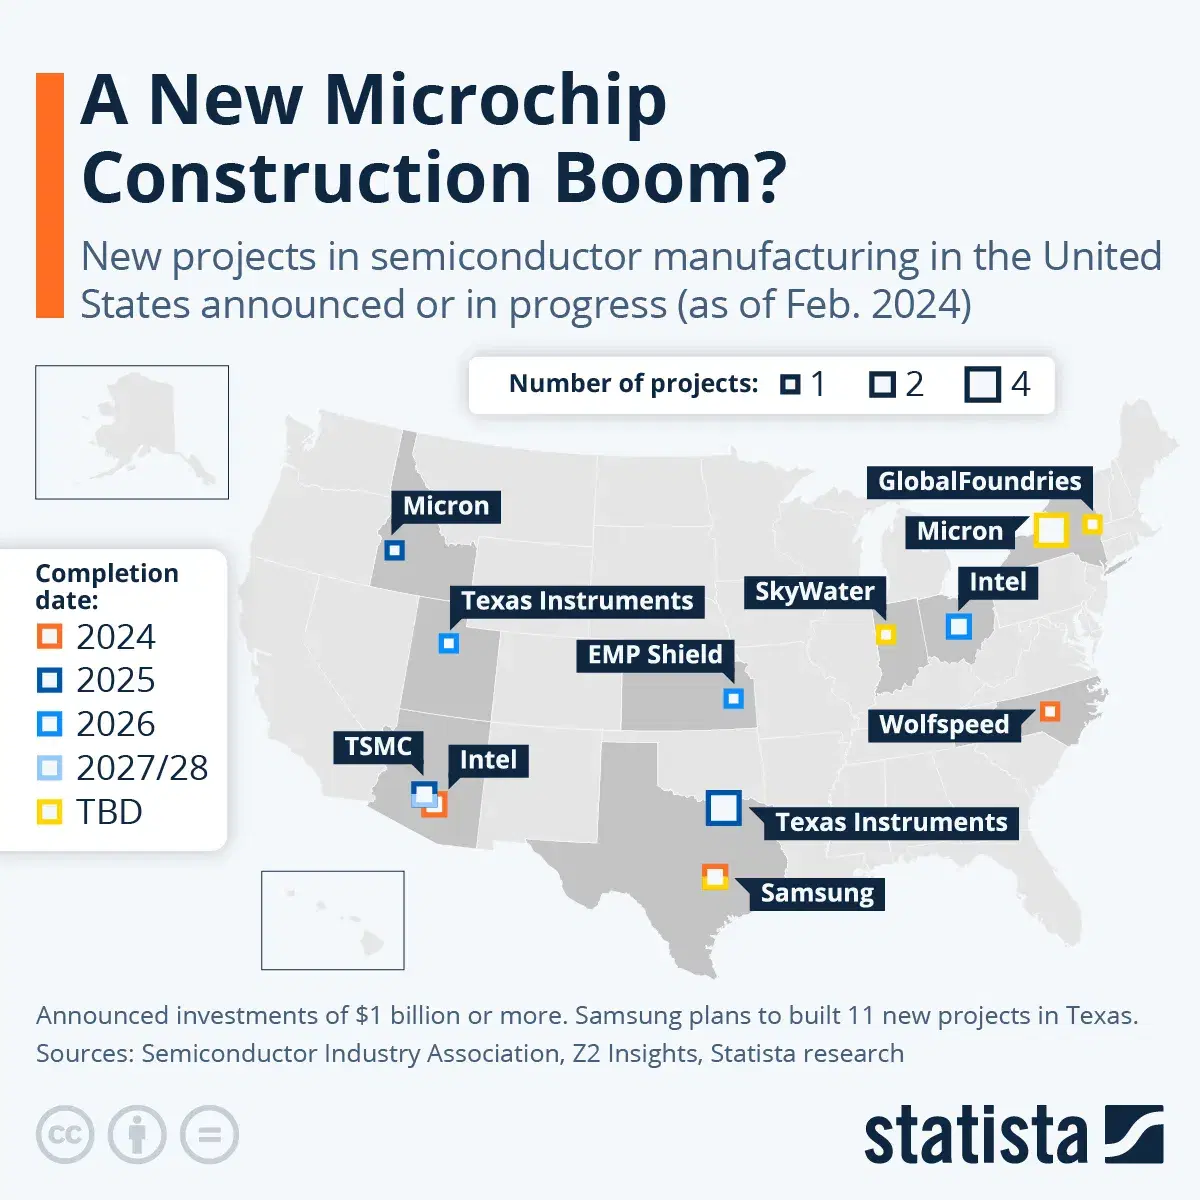 A New Microchip Construction Boom in the U.S.?